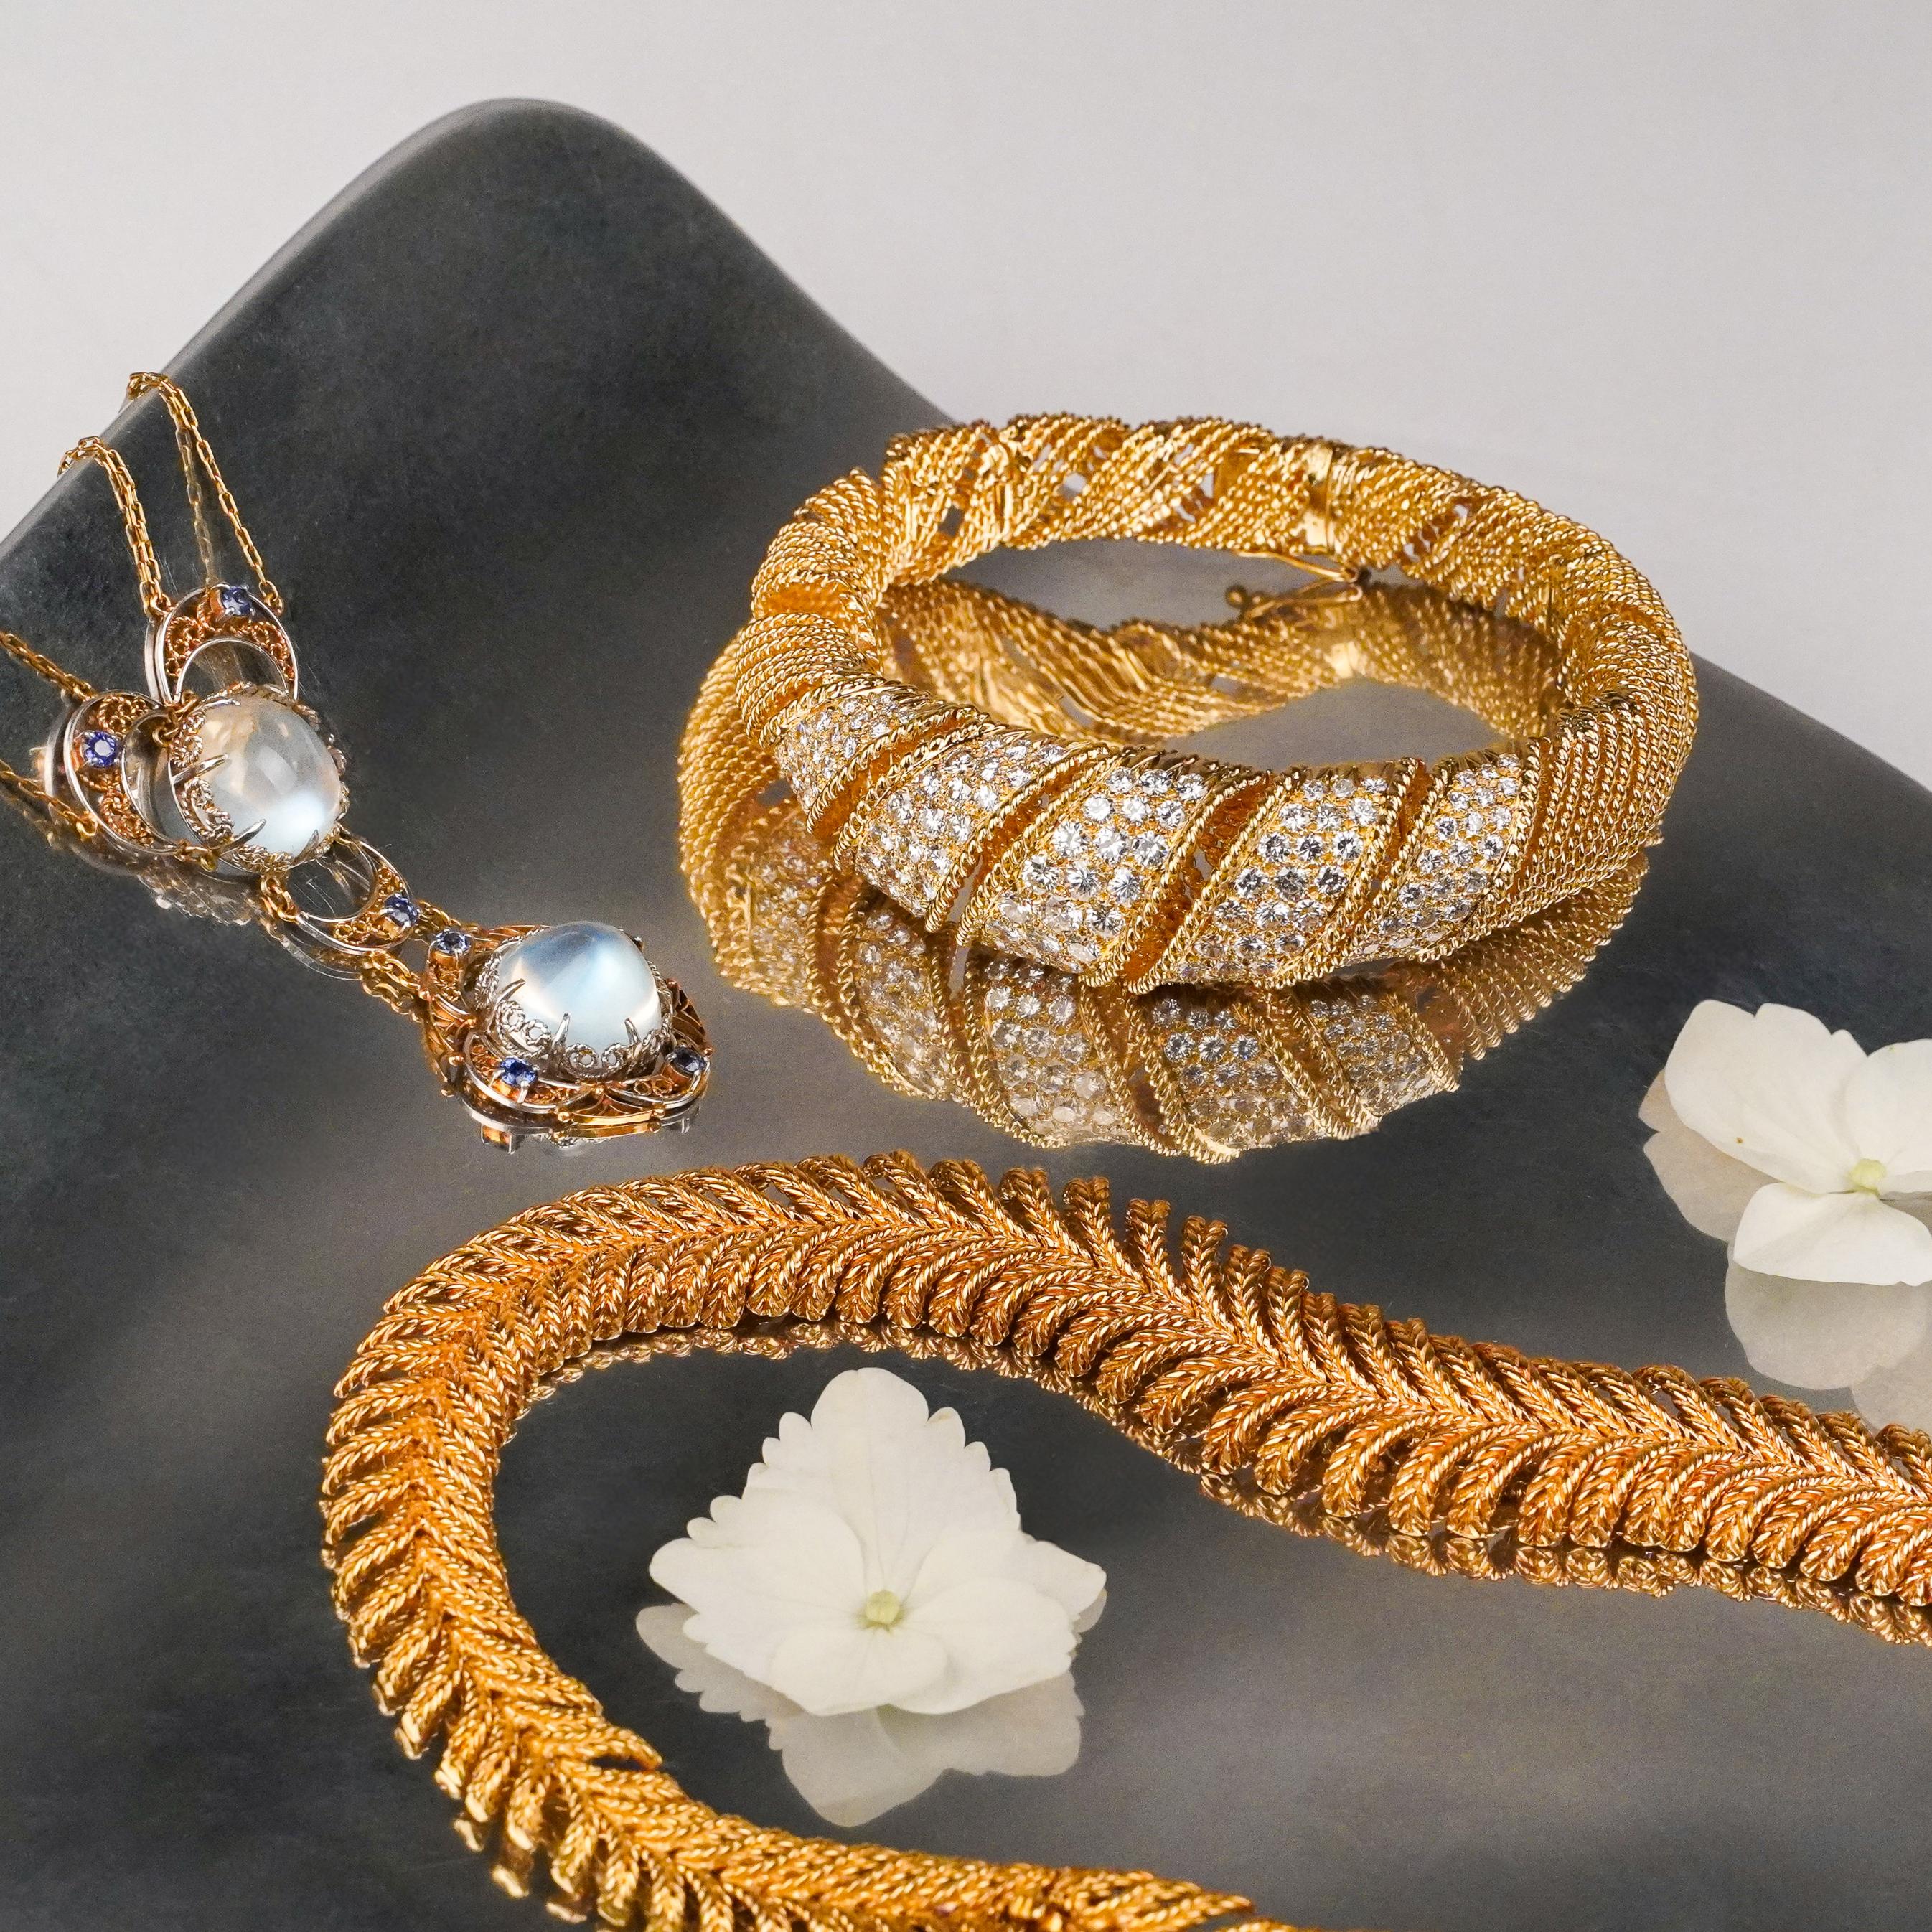 upcoming-fine-jewelry-auction